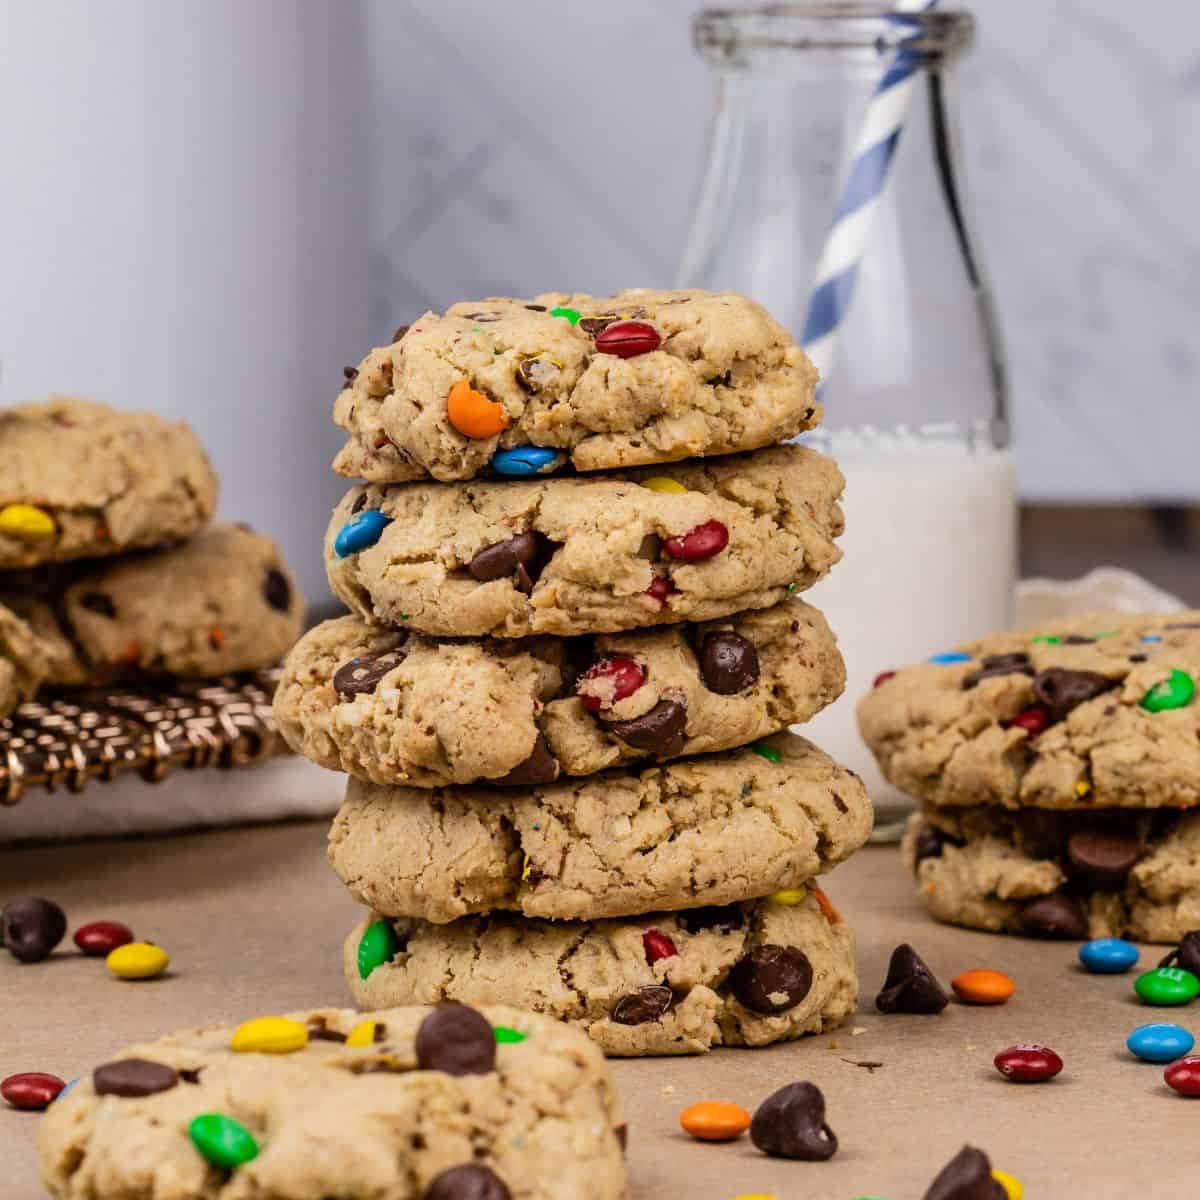 a stack of 5 gluten free monster cookies on a table surrounded by more cookies, chocolate chips, candies, and a glass of milk blurred in the background.